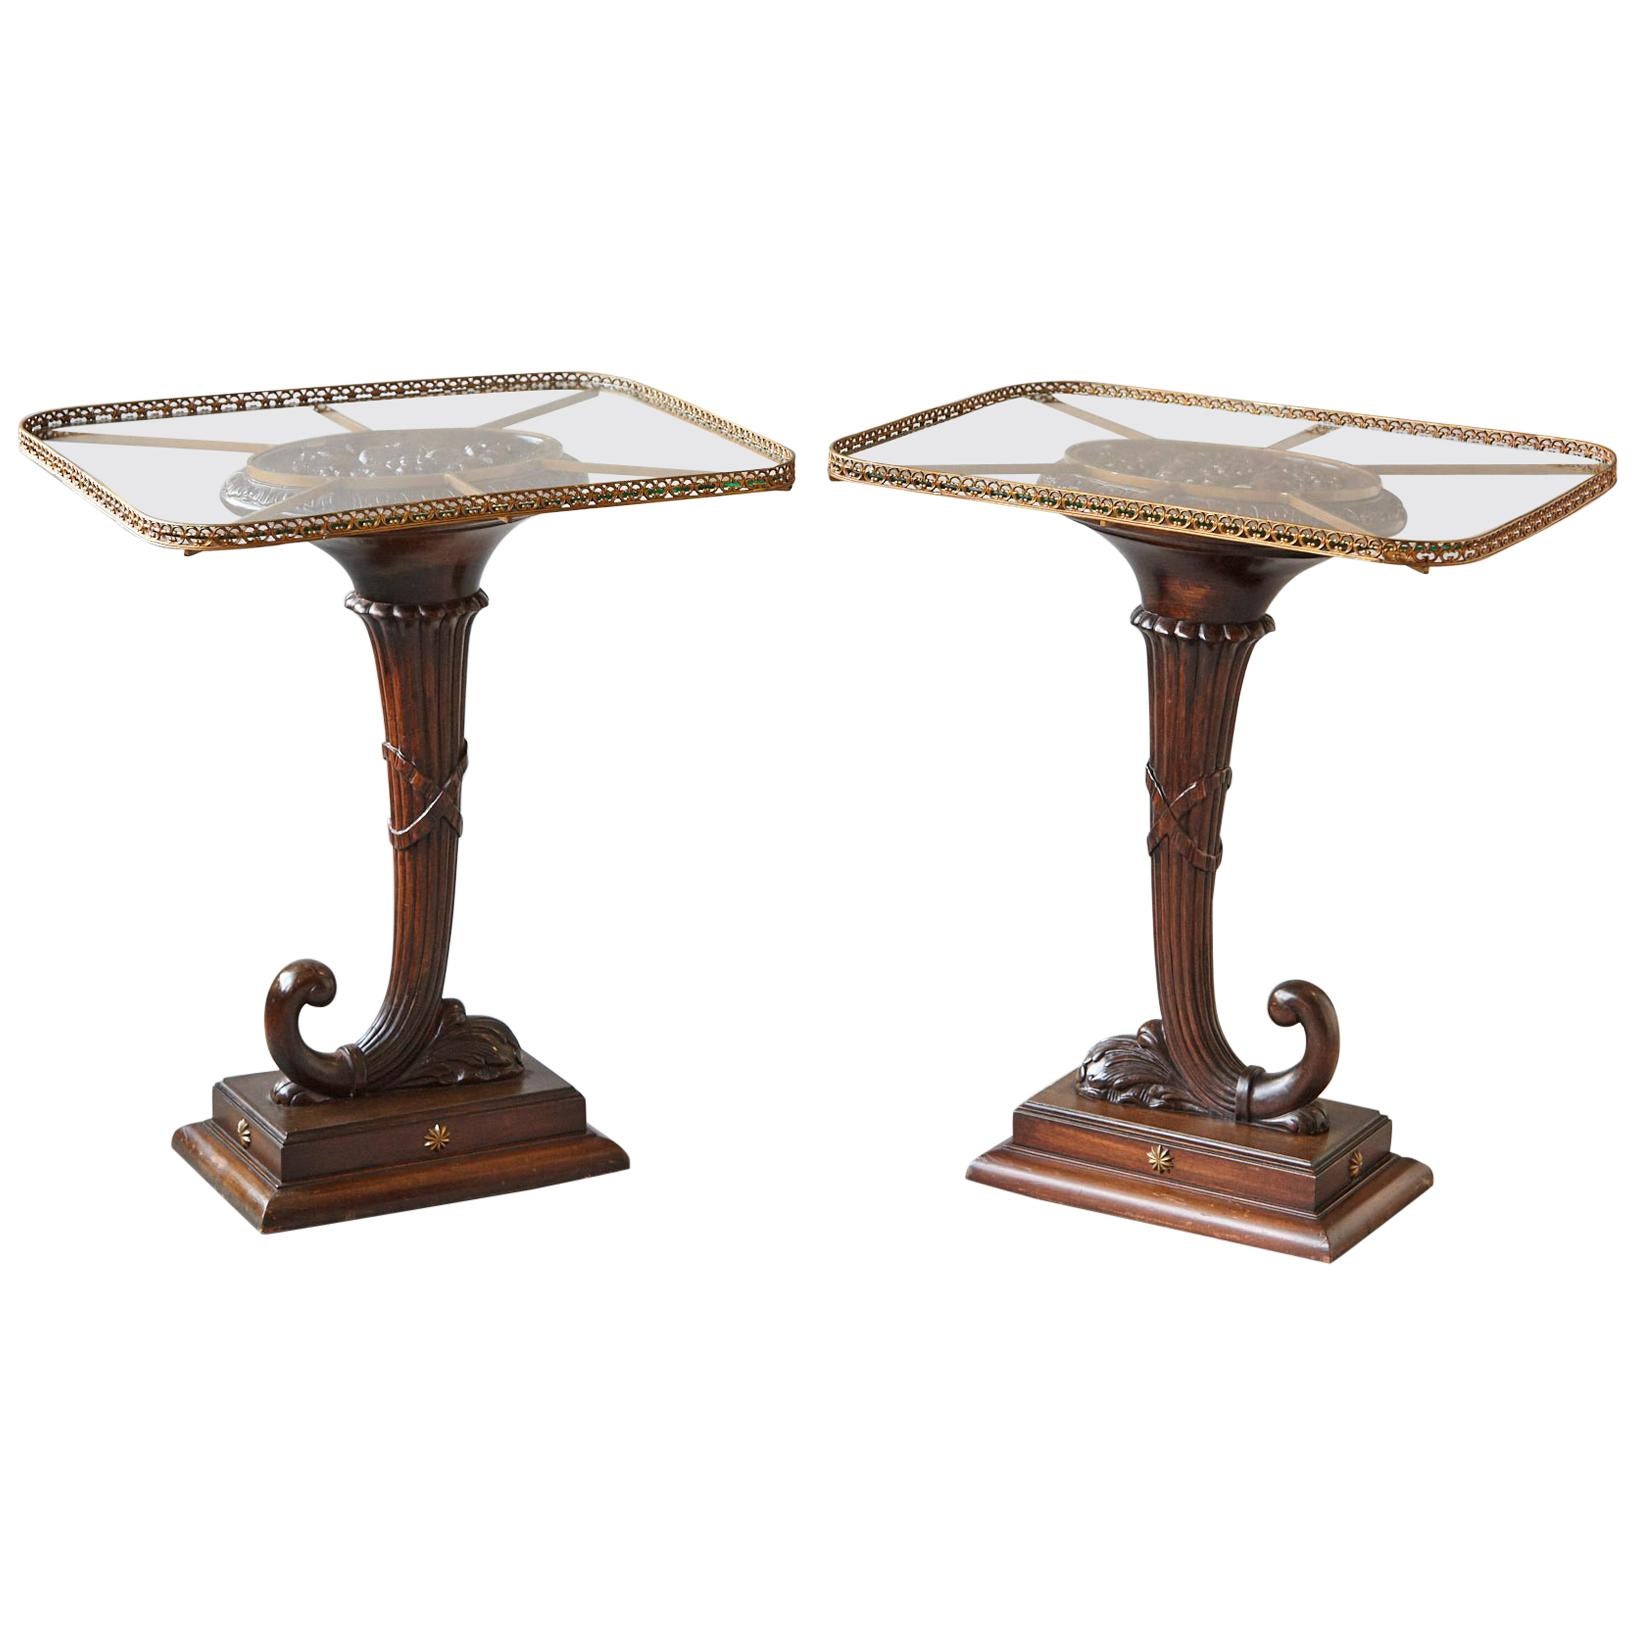 Pair of English Carved Cornucopia Glass Top Side Tables with Brass Galleries